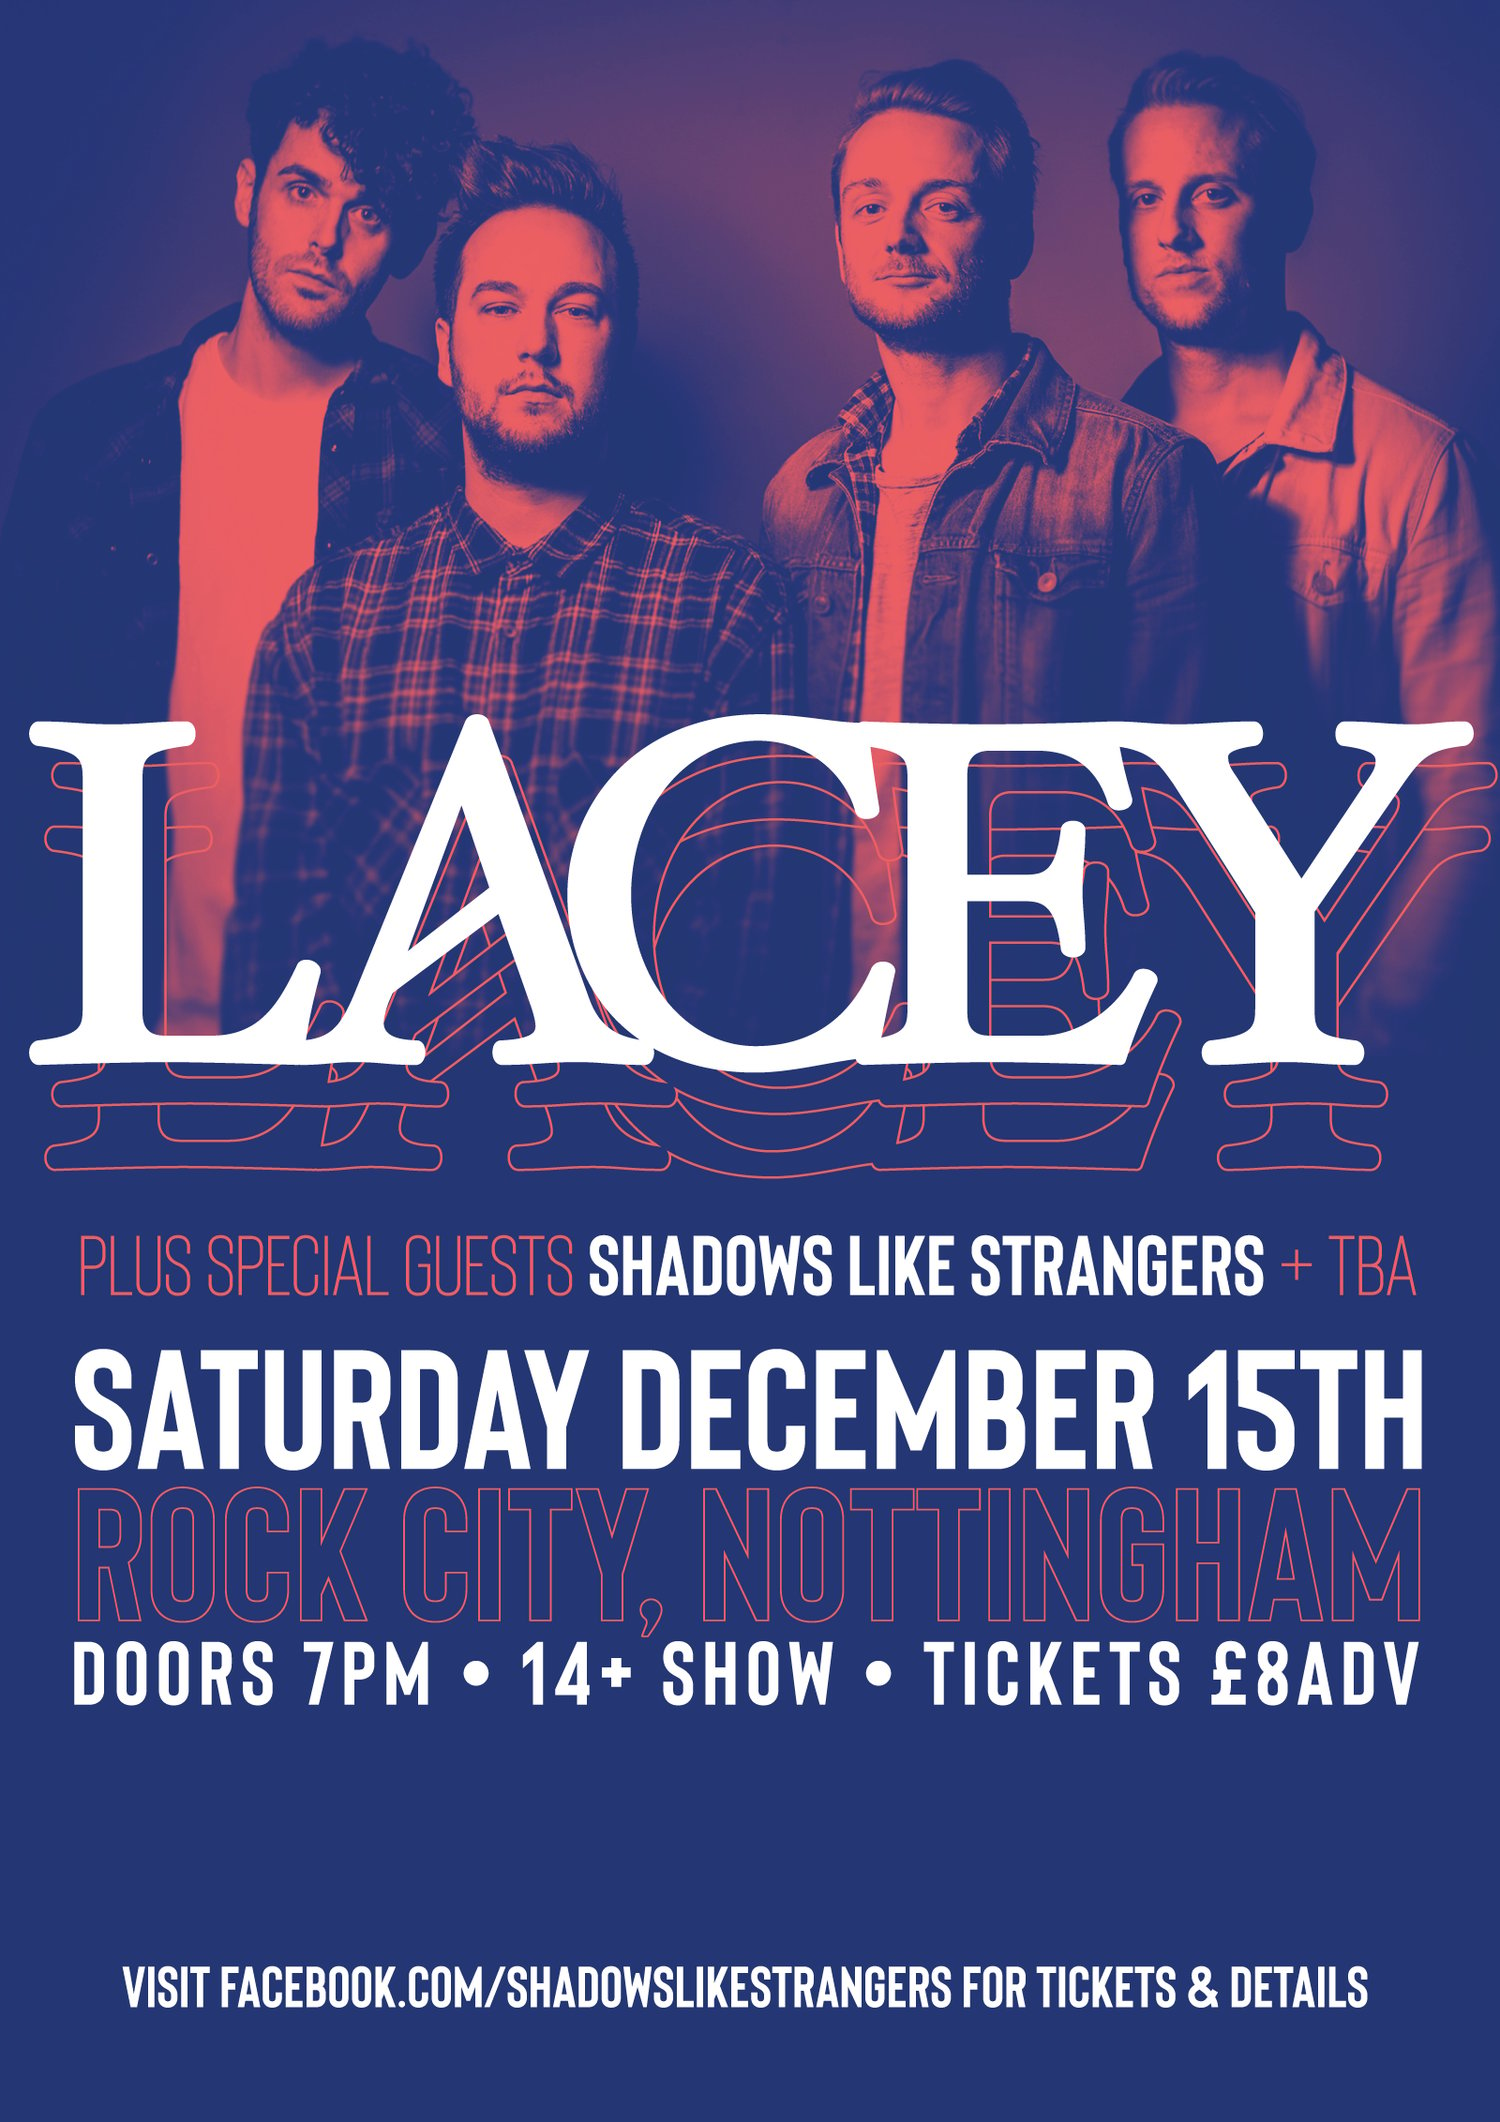 Lacey + SLS LIVE @ Rock City [Tickets]